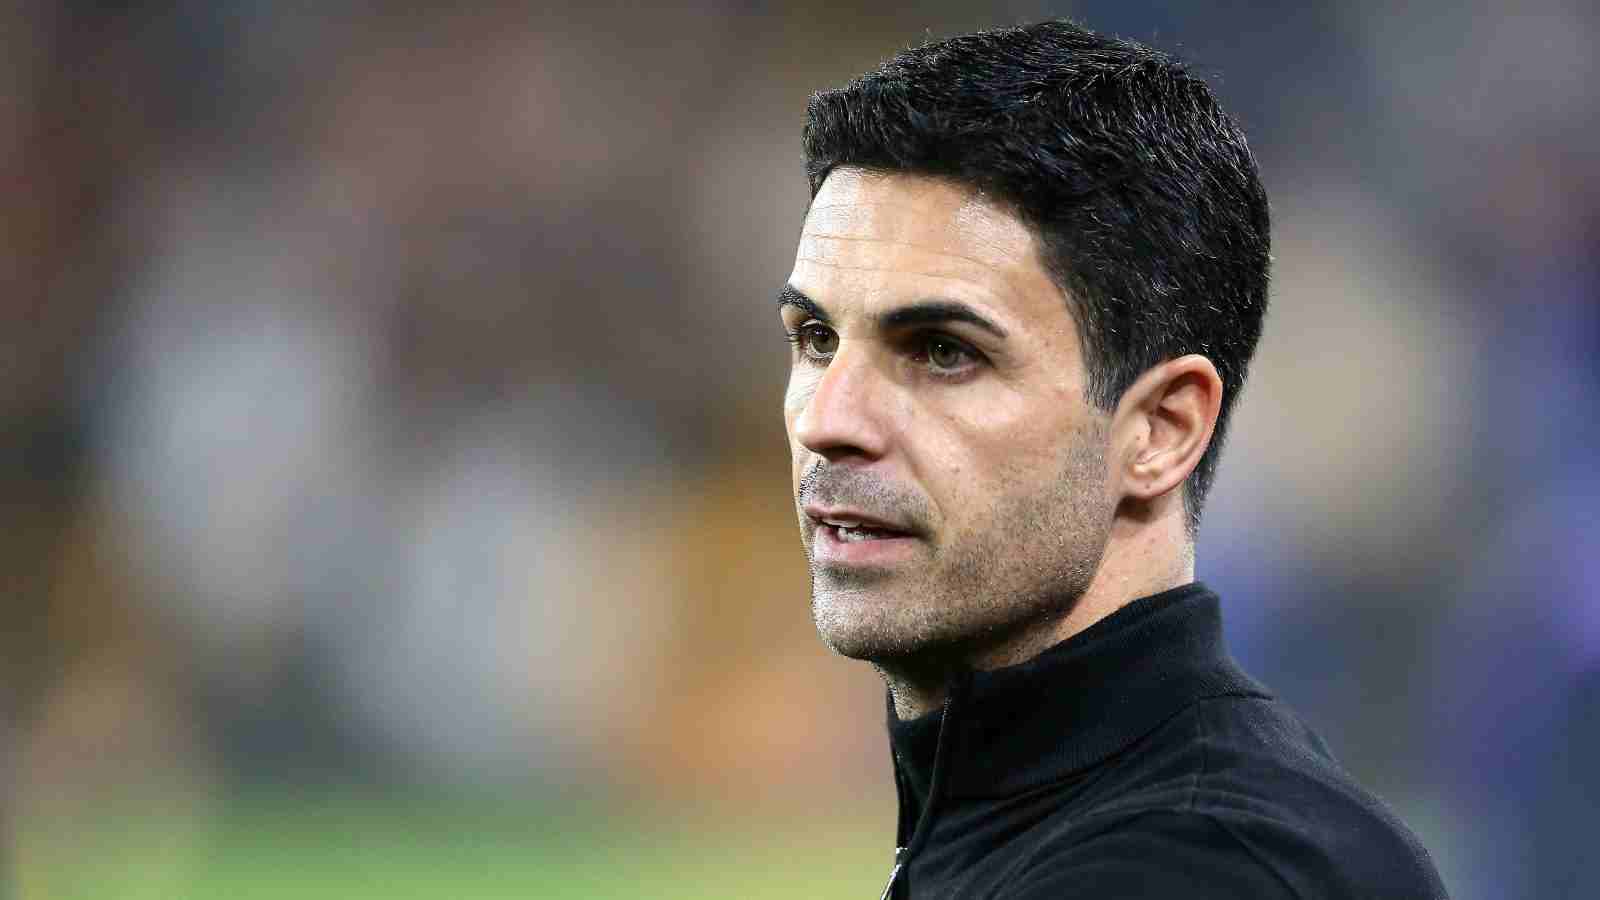 Arsenal Transfer News: Mikel Arteta Has Informed That The £110,000-Per-Week Player Won't Be Leaving The Club This Summer